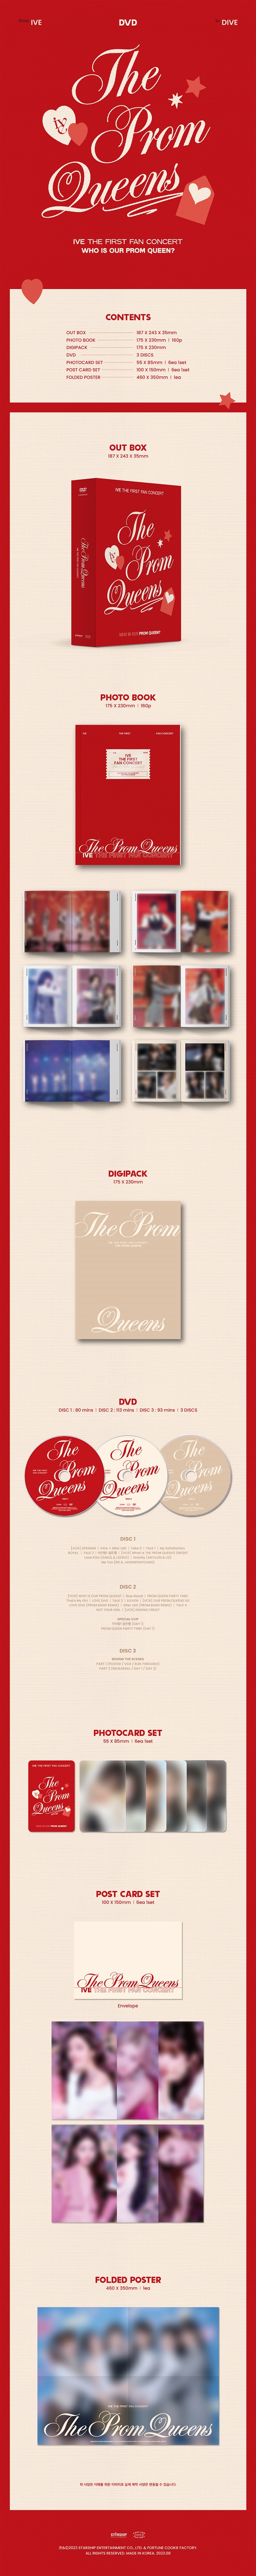 IVE｜『IVE THE FIRST FAN CONCERT <The Prom Queens>』Blu